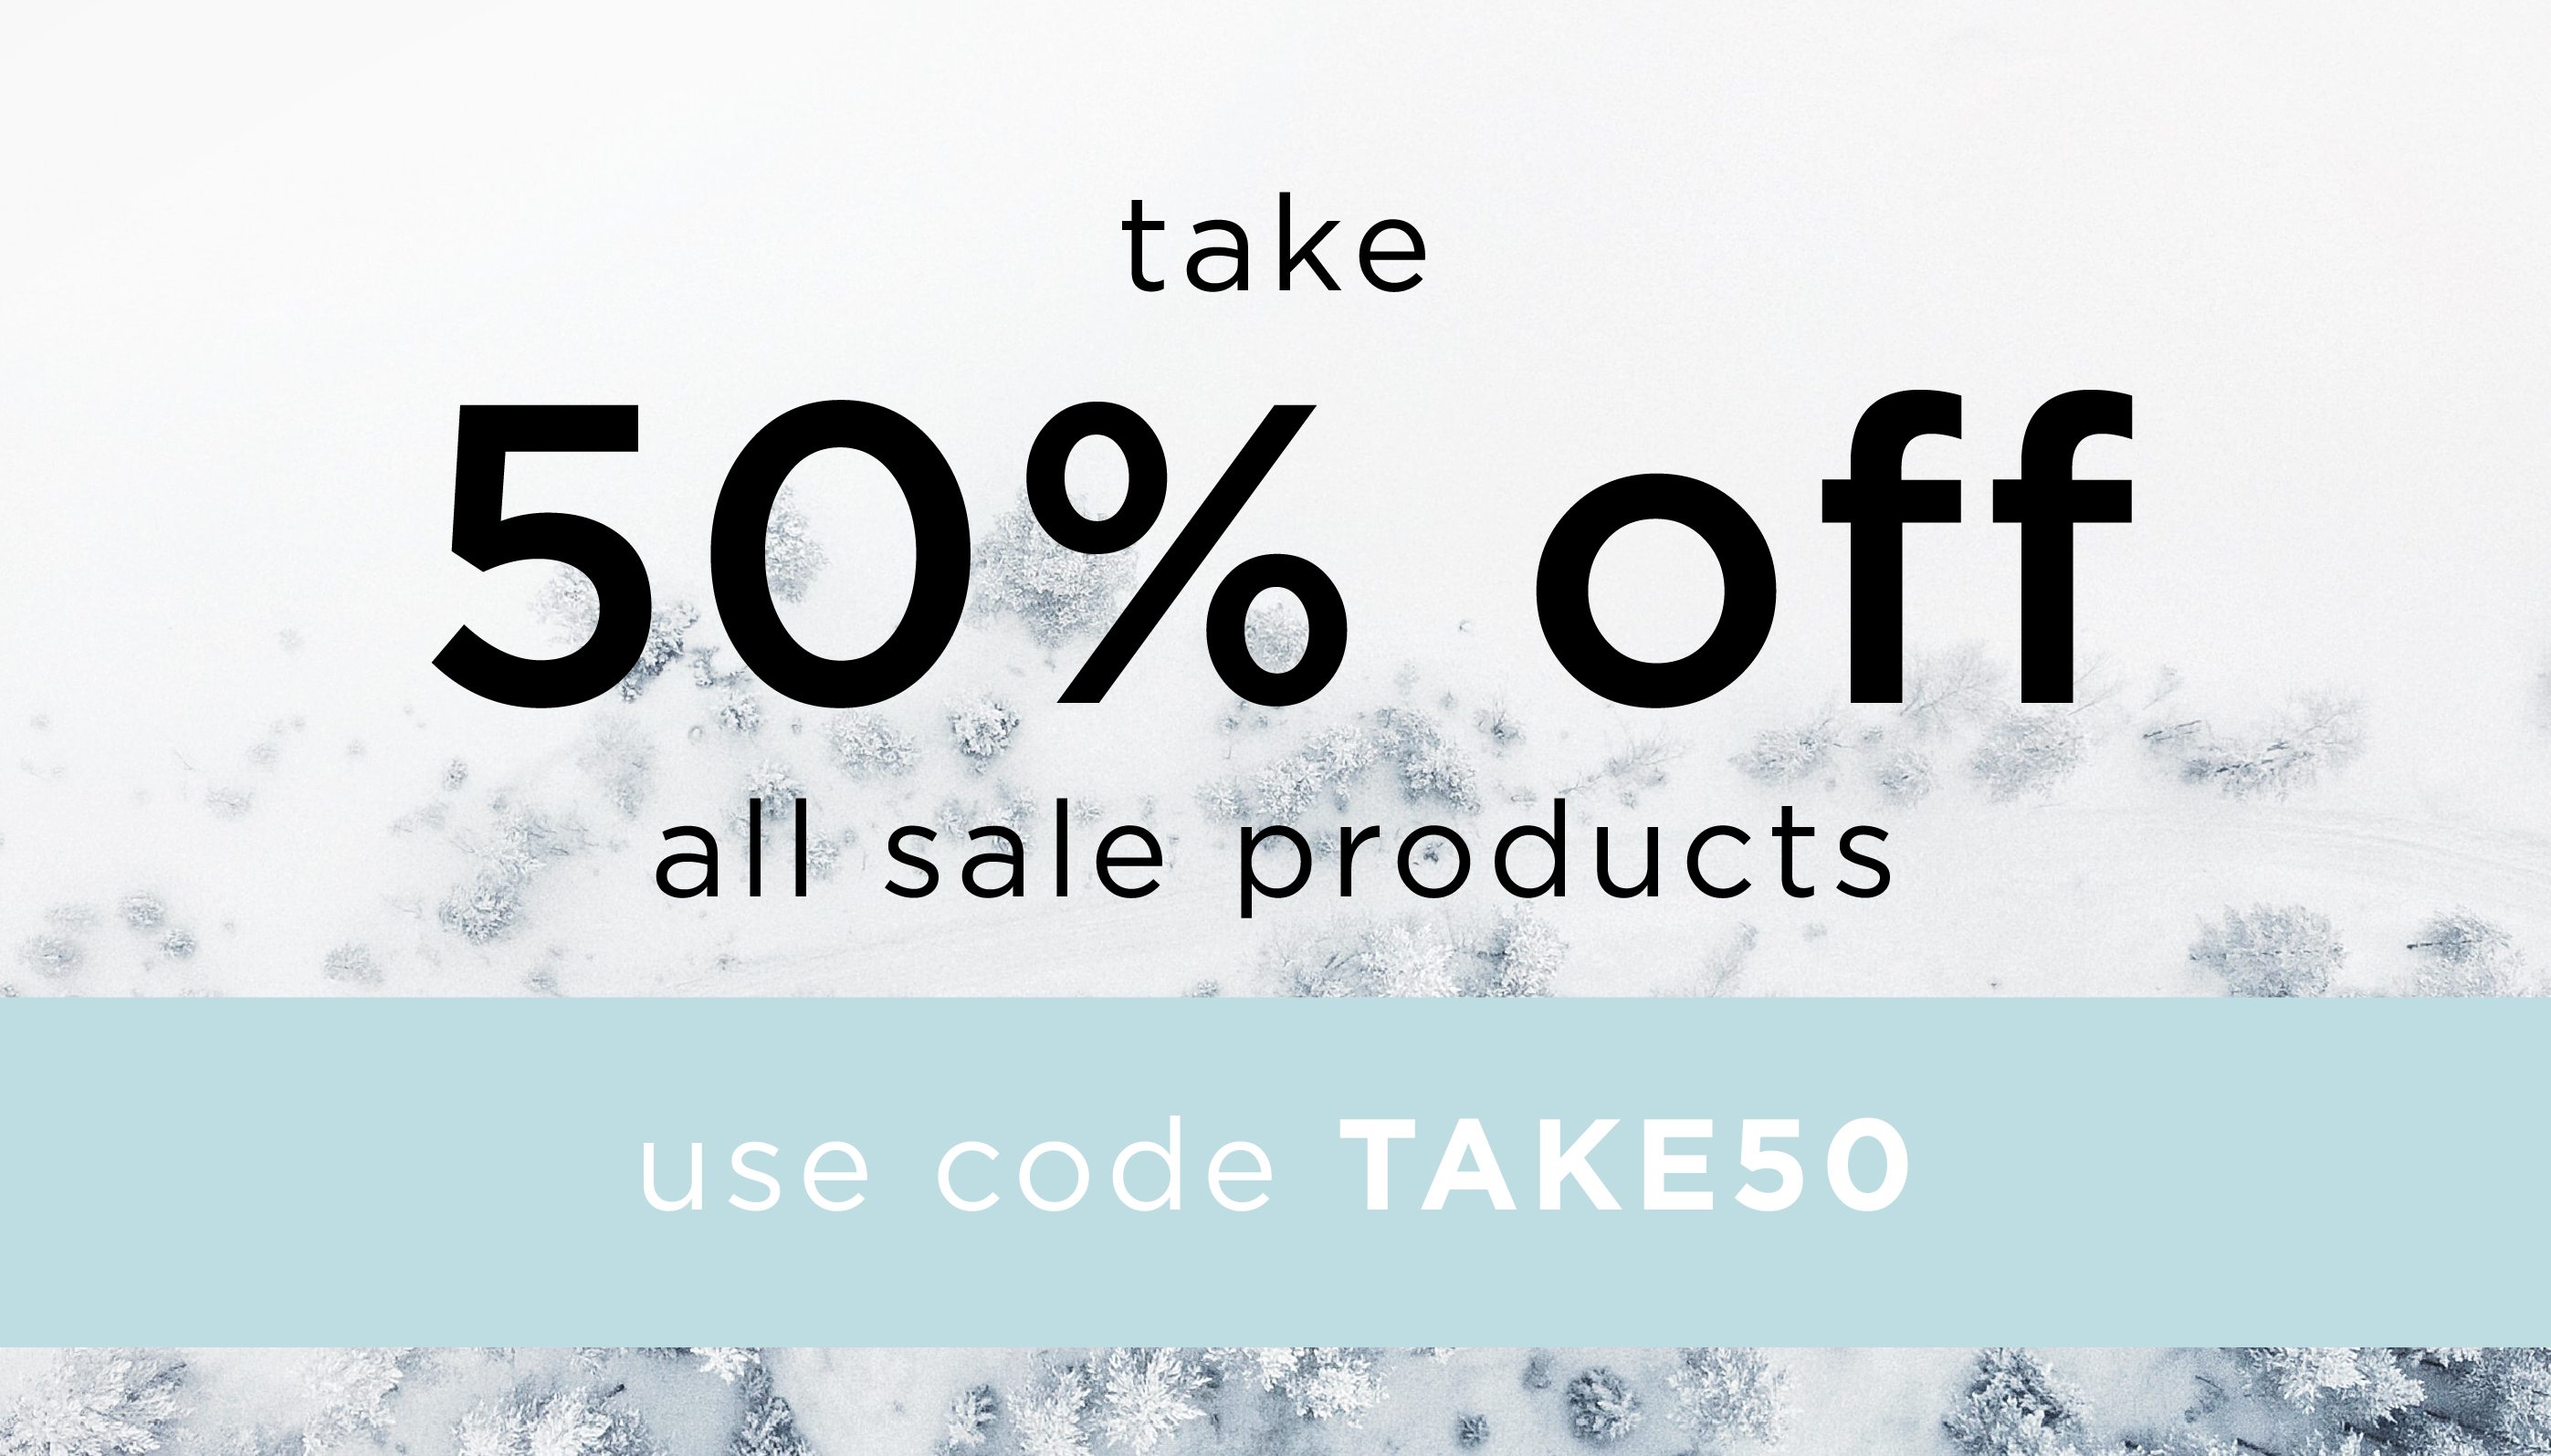 take 50% off all sale products! use code TAKE50